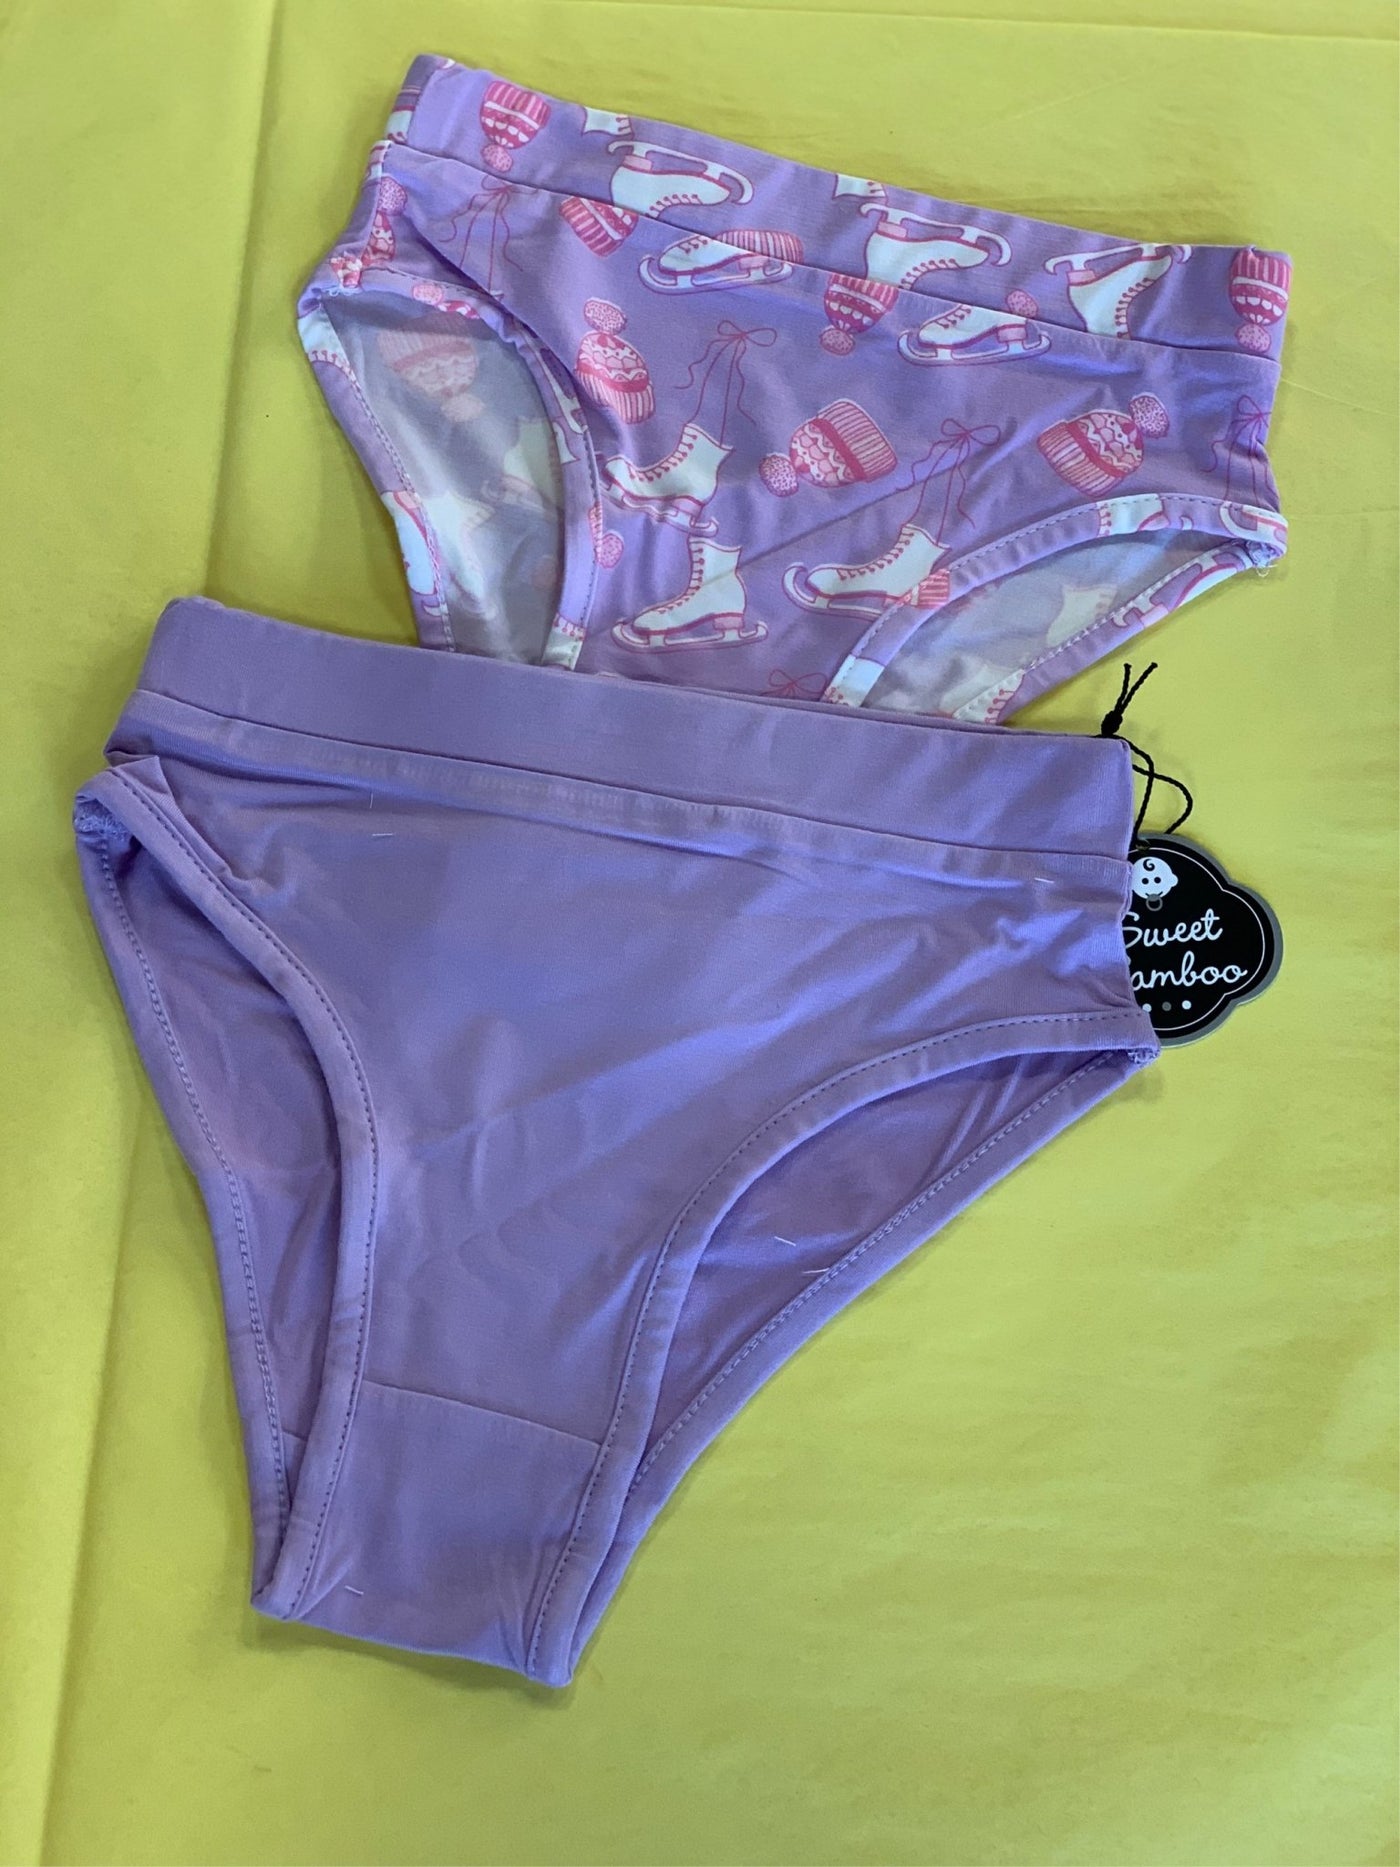 Sweet Bamboo 2 Piece Underwear In Purple Ice Skates and Solid Purple  Pattern